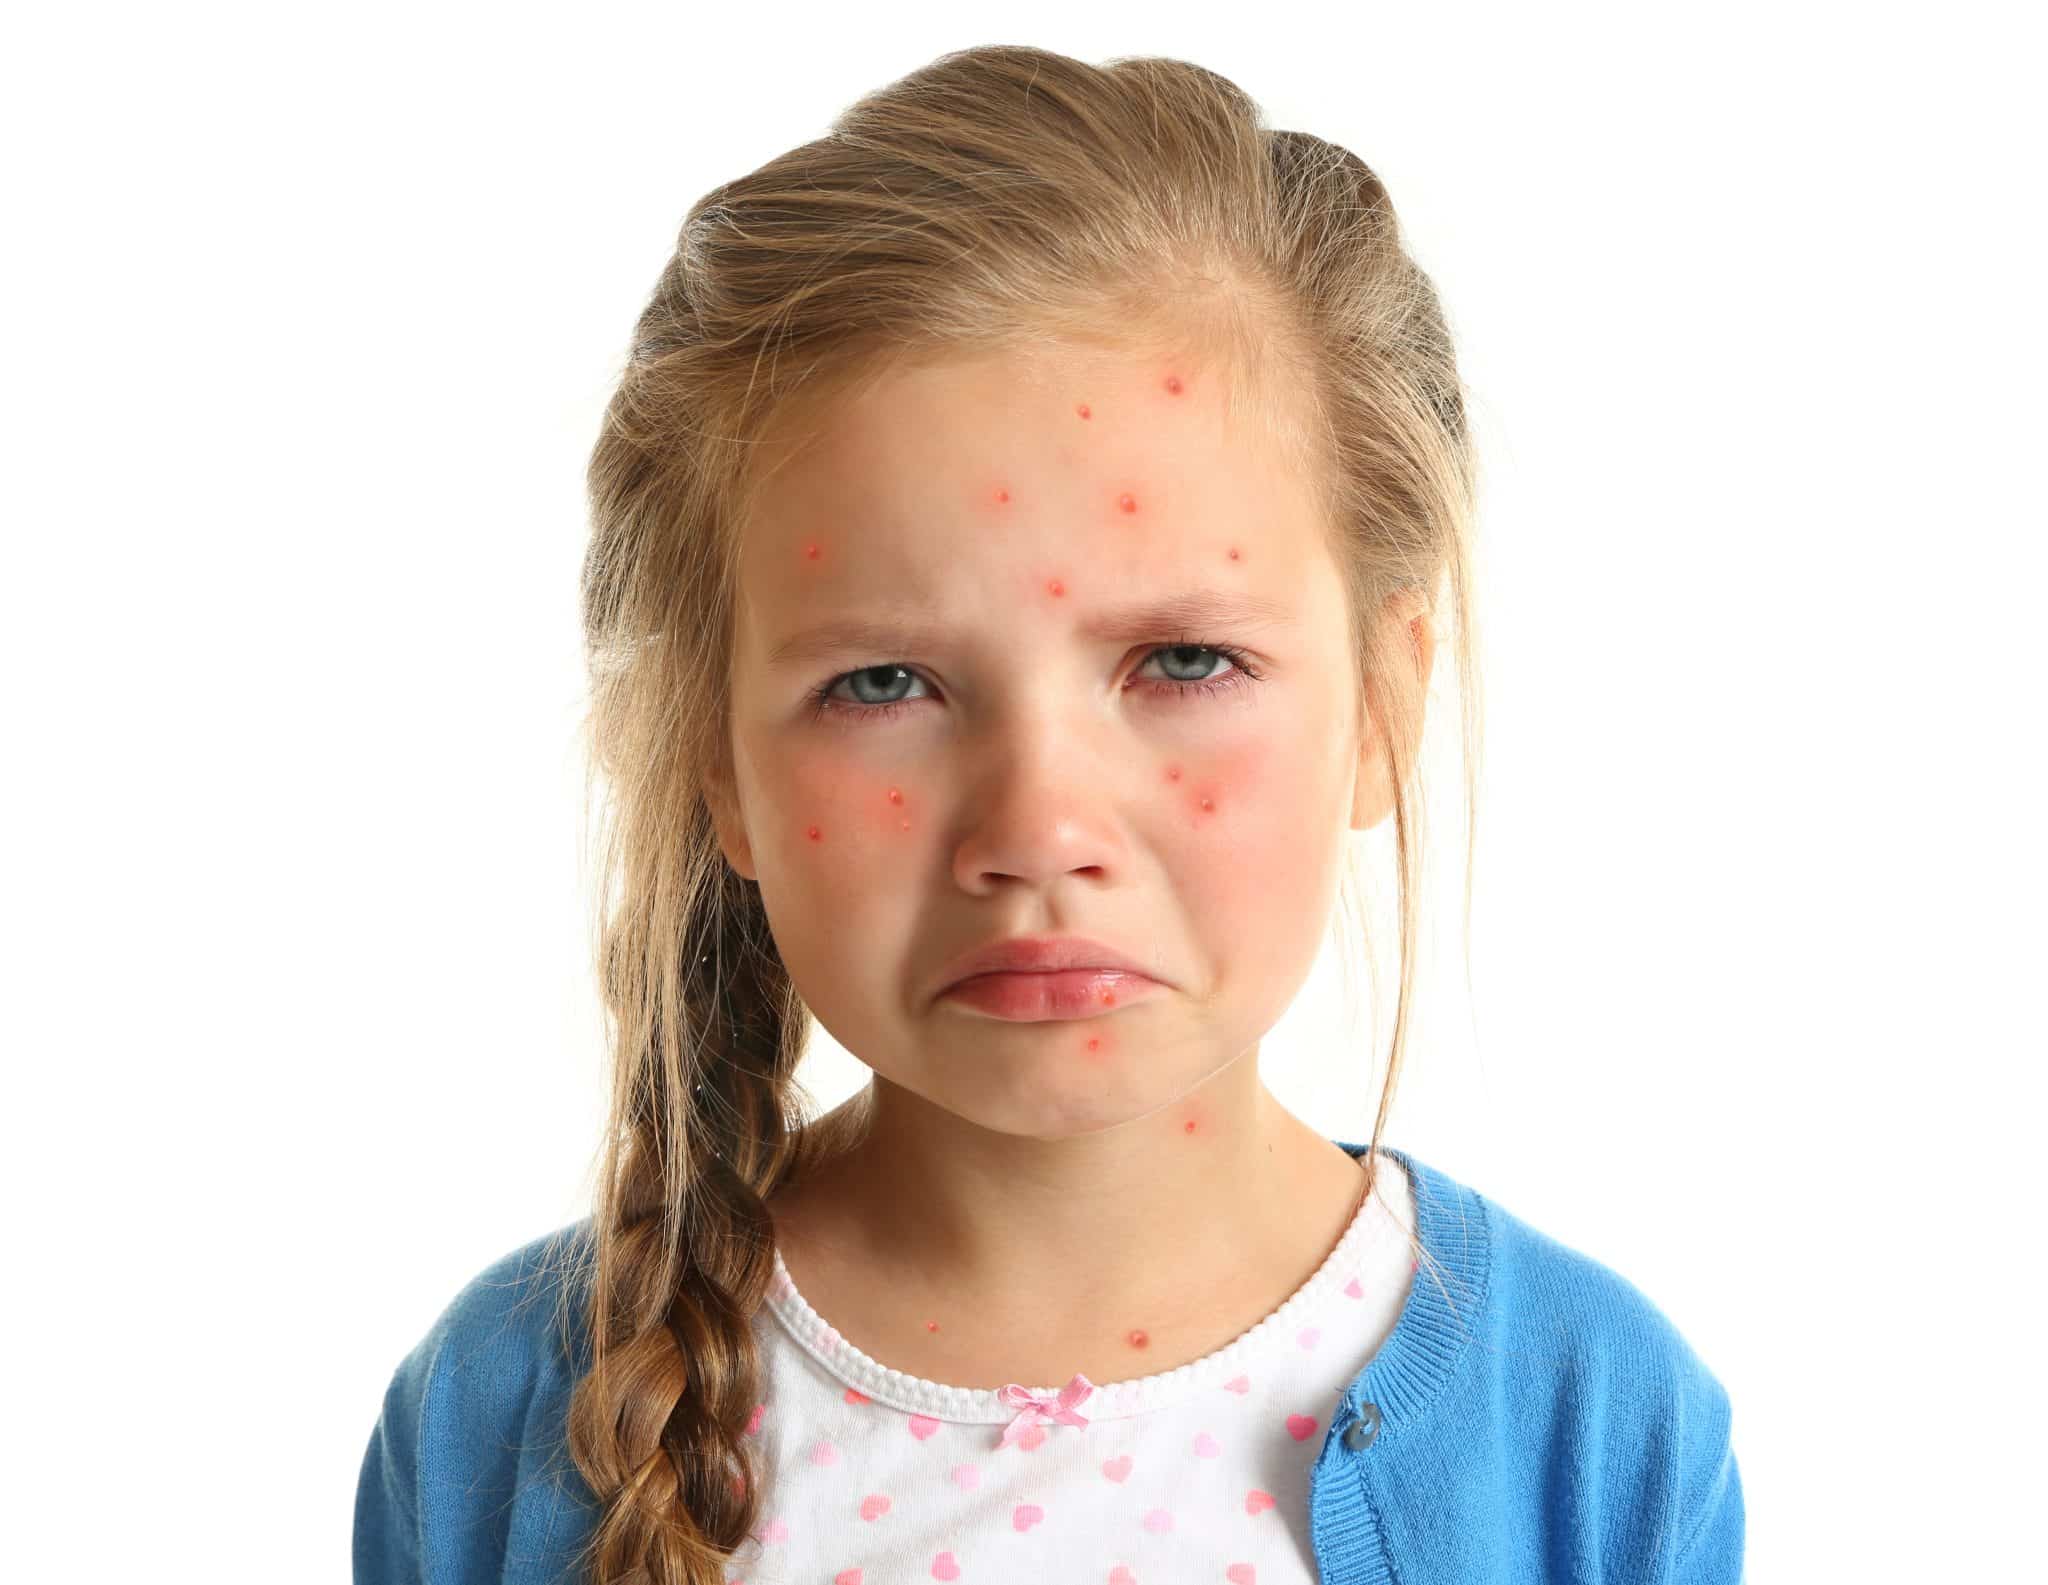 Female child frowning with chickenpox on her face and neck